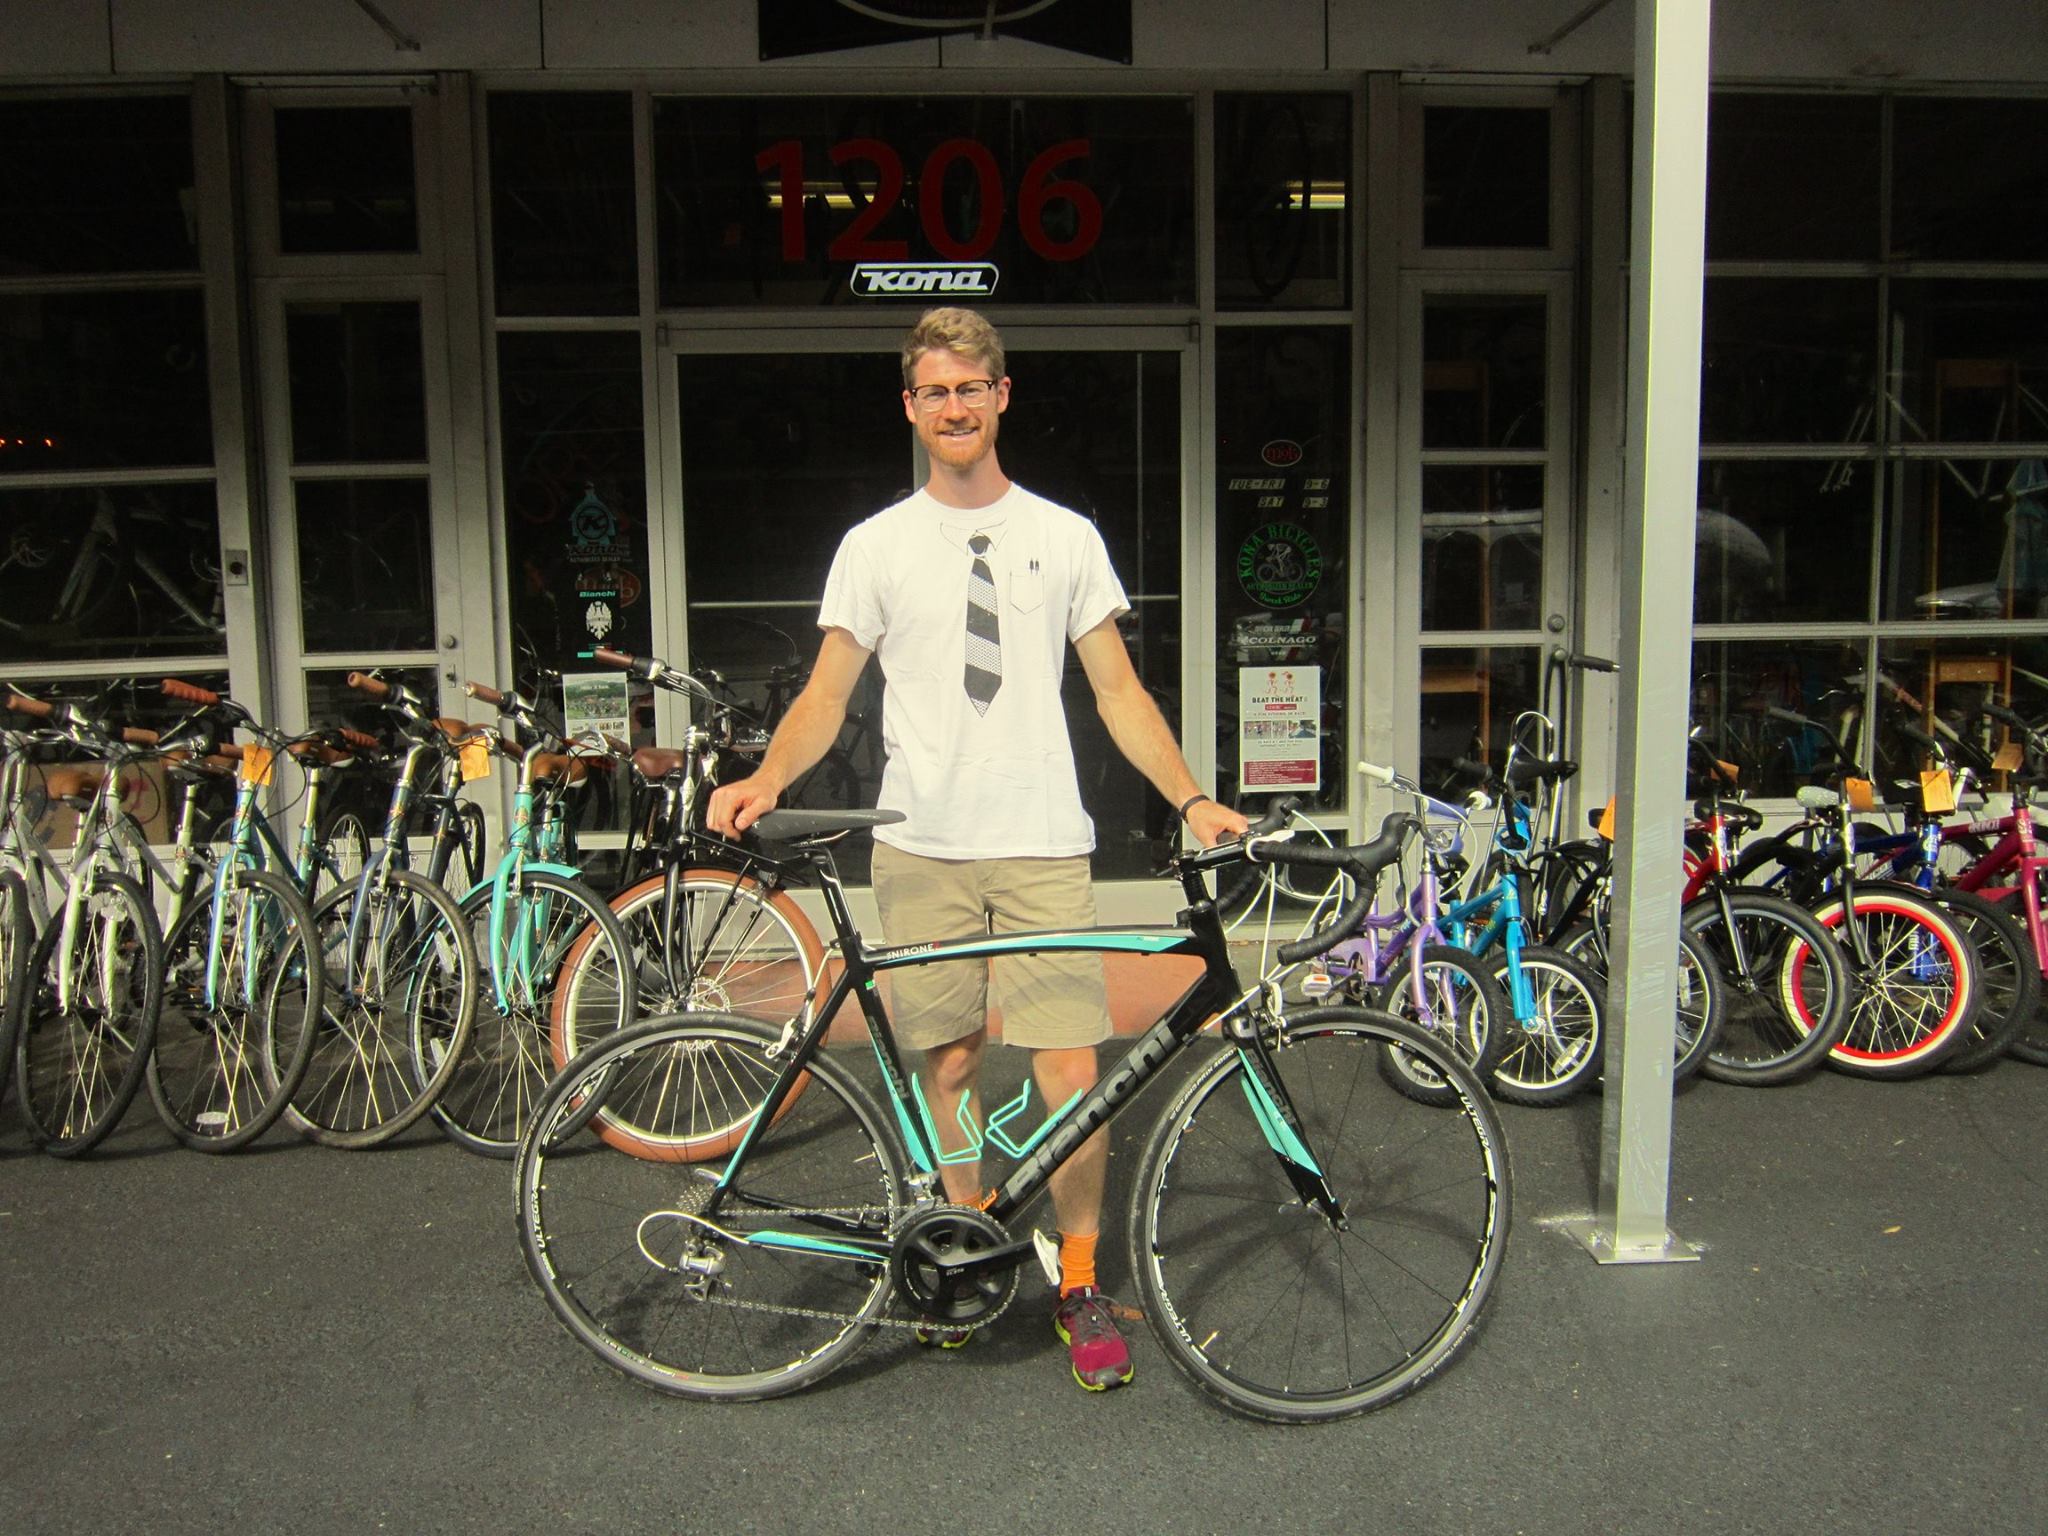 Andy with his Bianchi Via Nirone 7